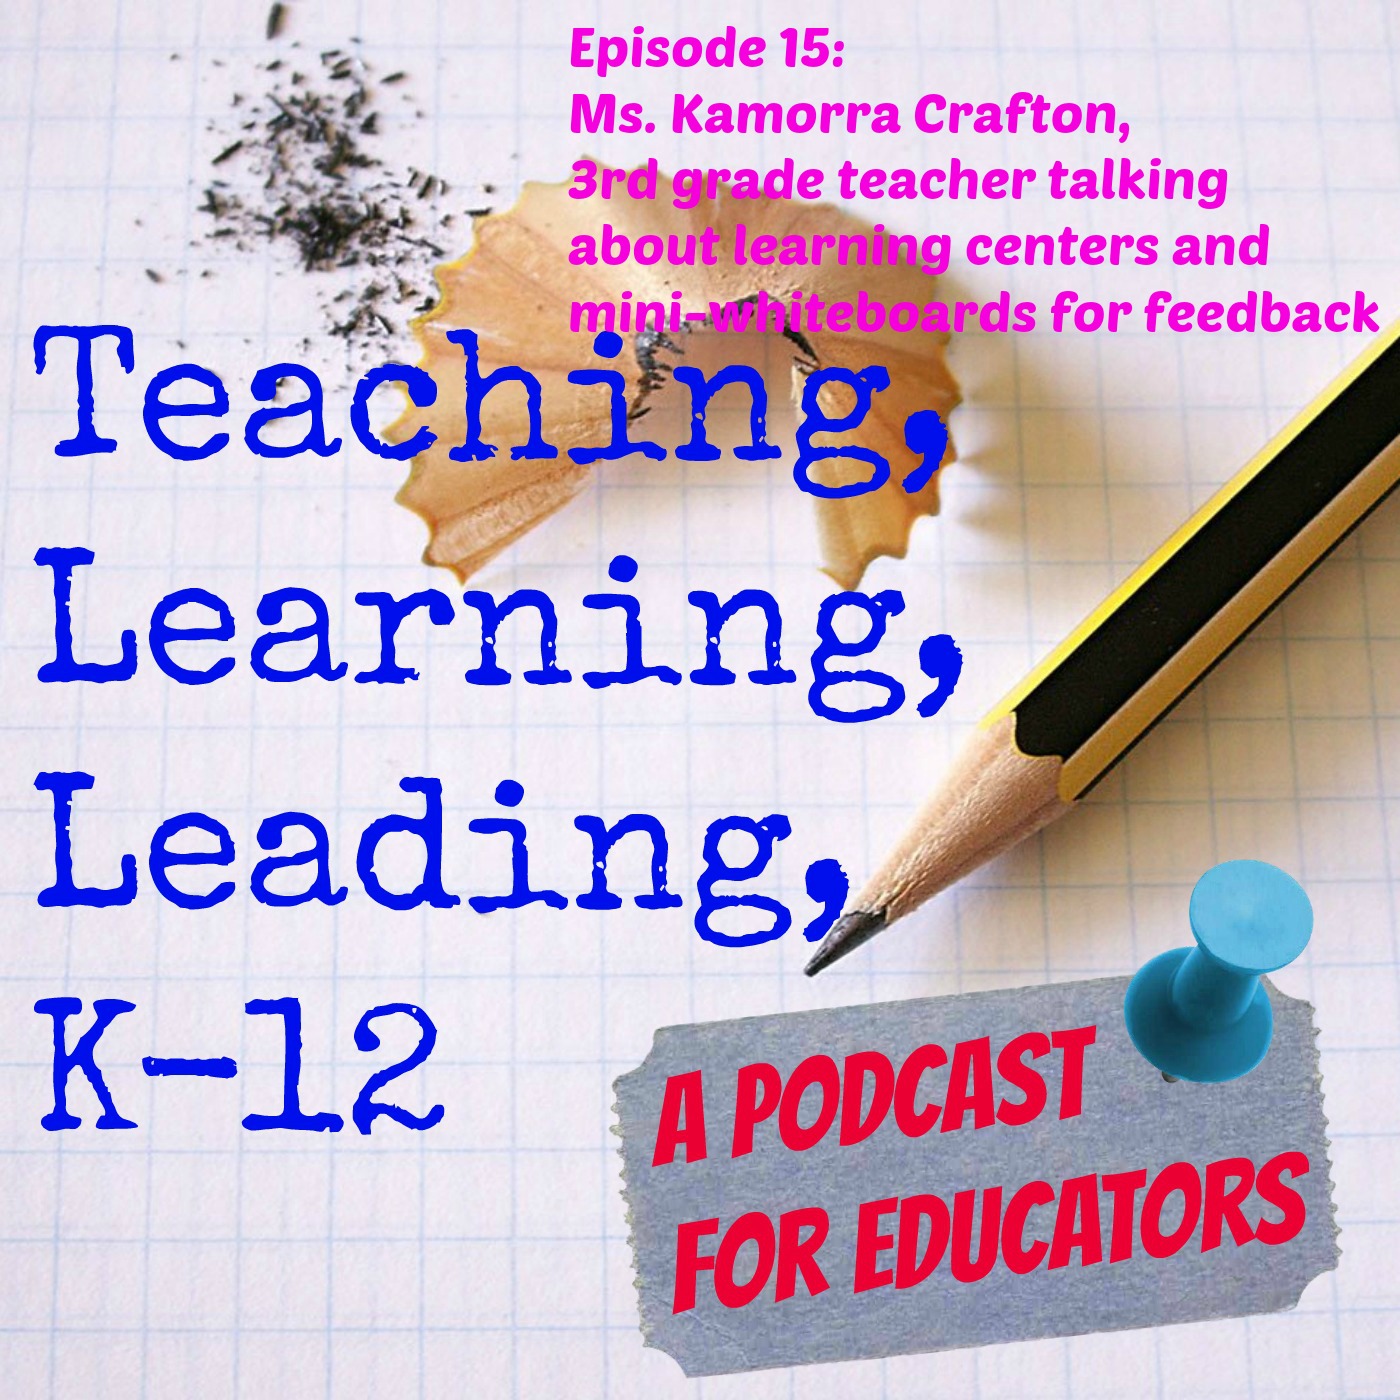 Episode 15: Ms. Kamorra Crafton, 3rd grade teacher talking with me about learning centers and mini-whiteboards